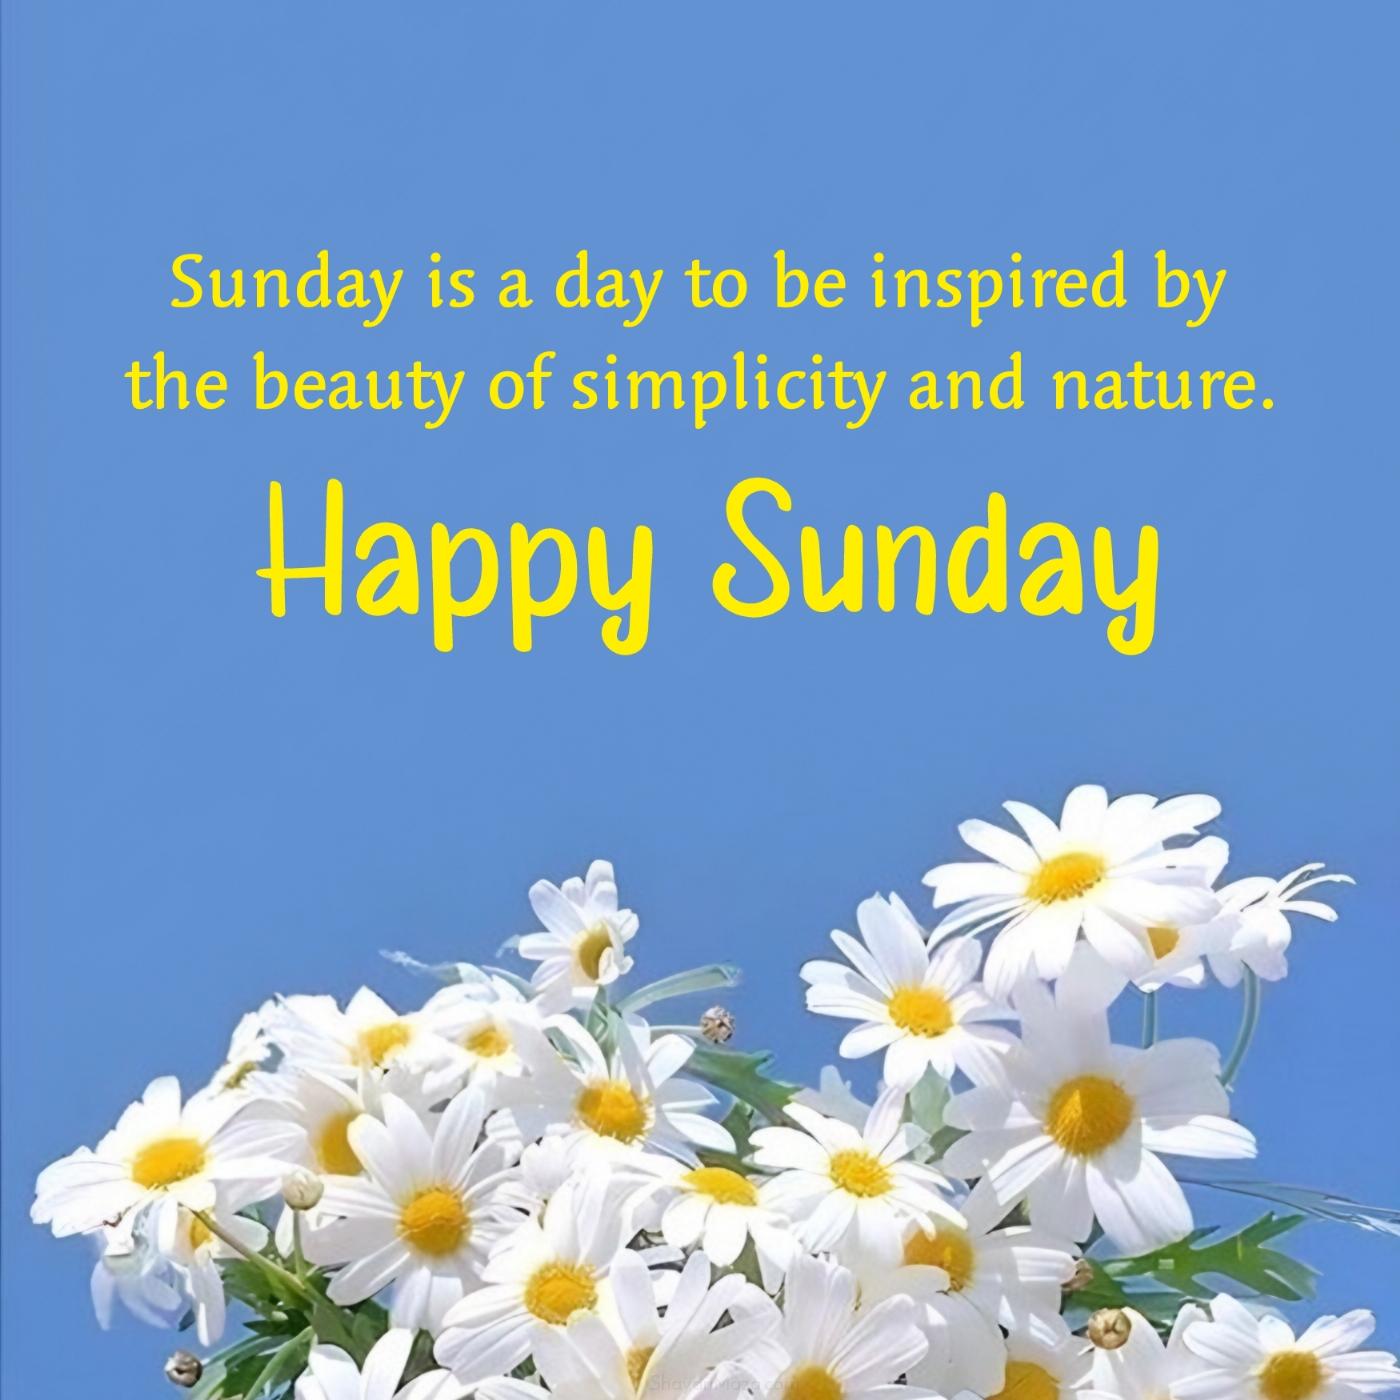 Sunday is a day to be inspired by the beauty of simplicity